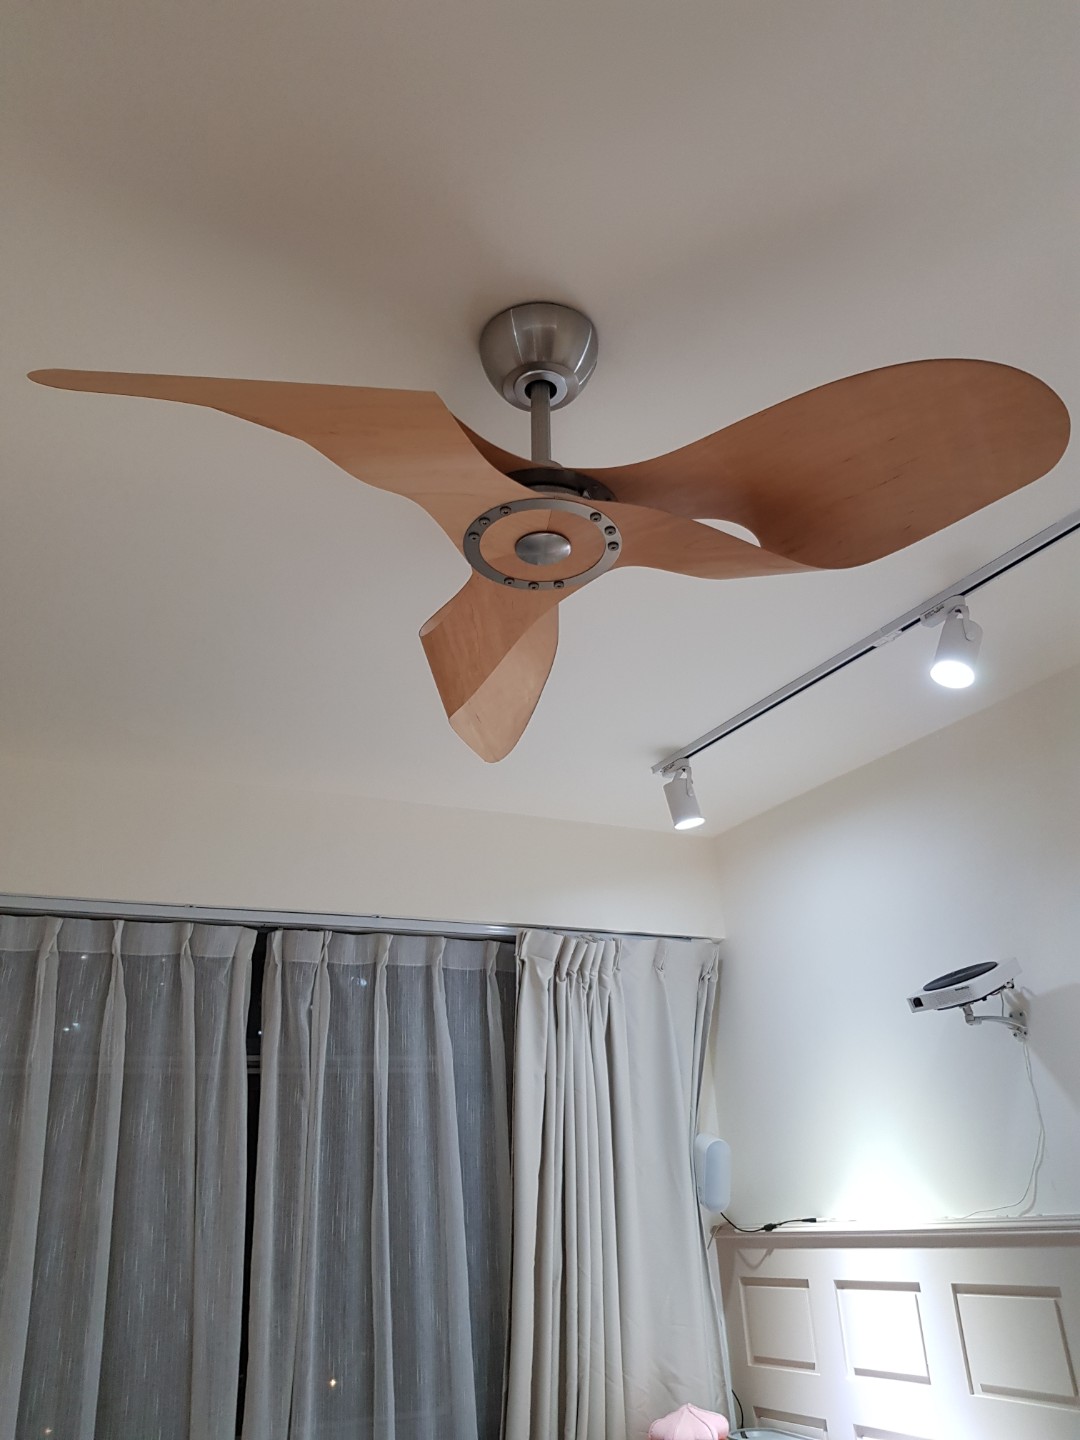 MEMORY Ceiling Fan 3 Natural wood Blades with Remote control